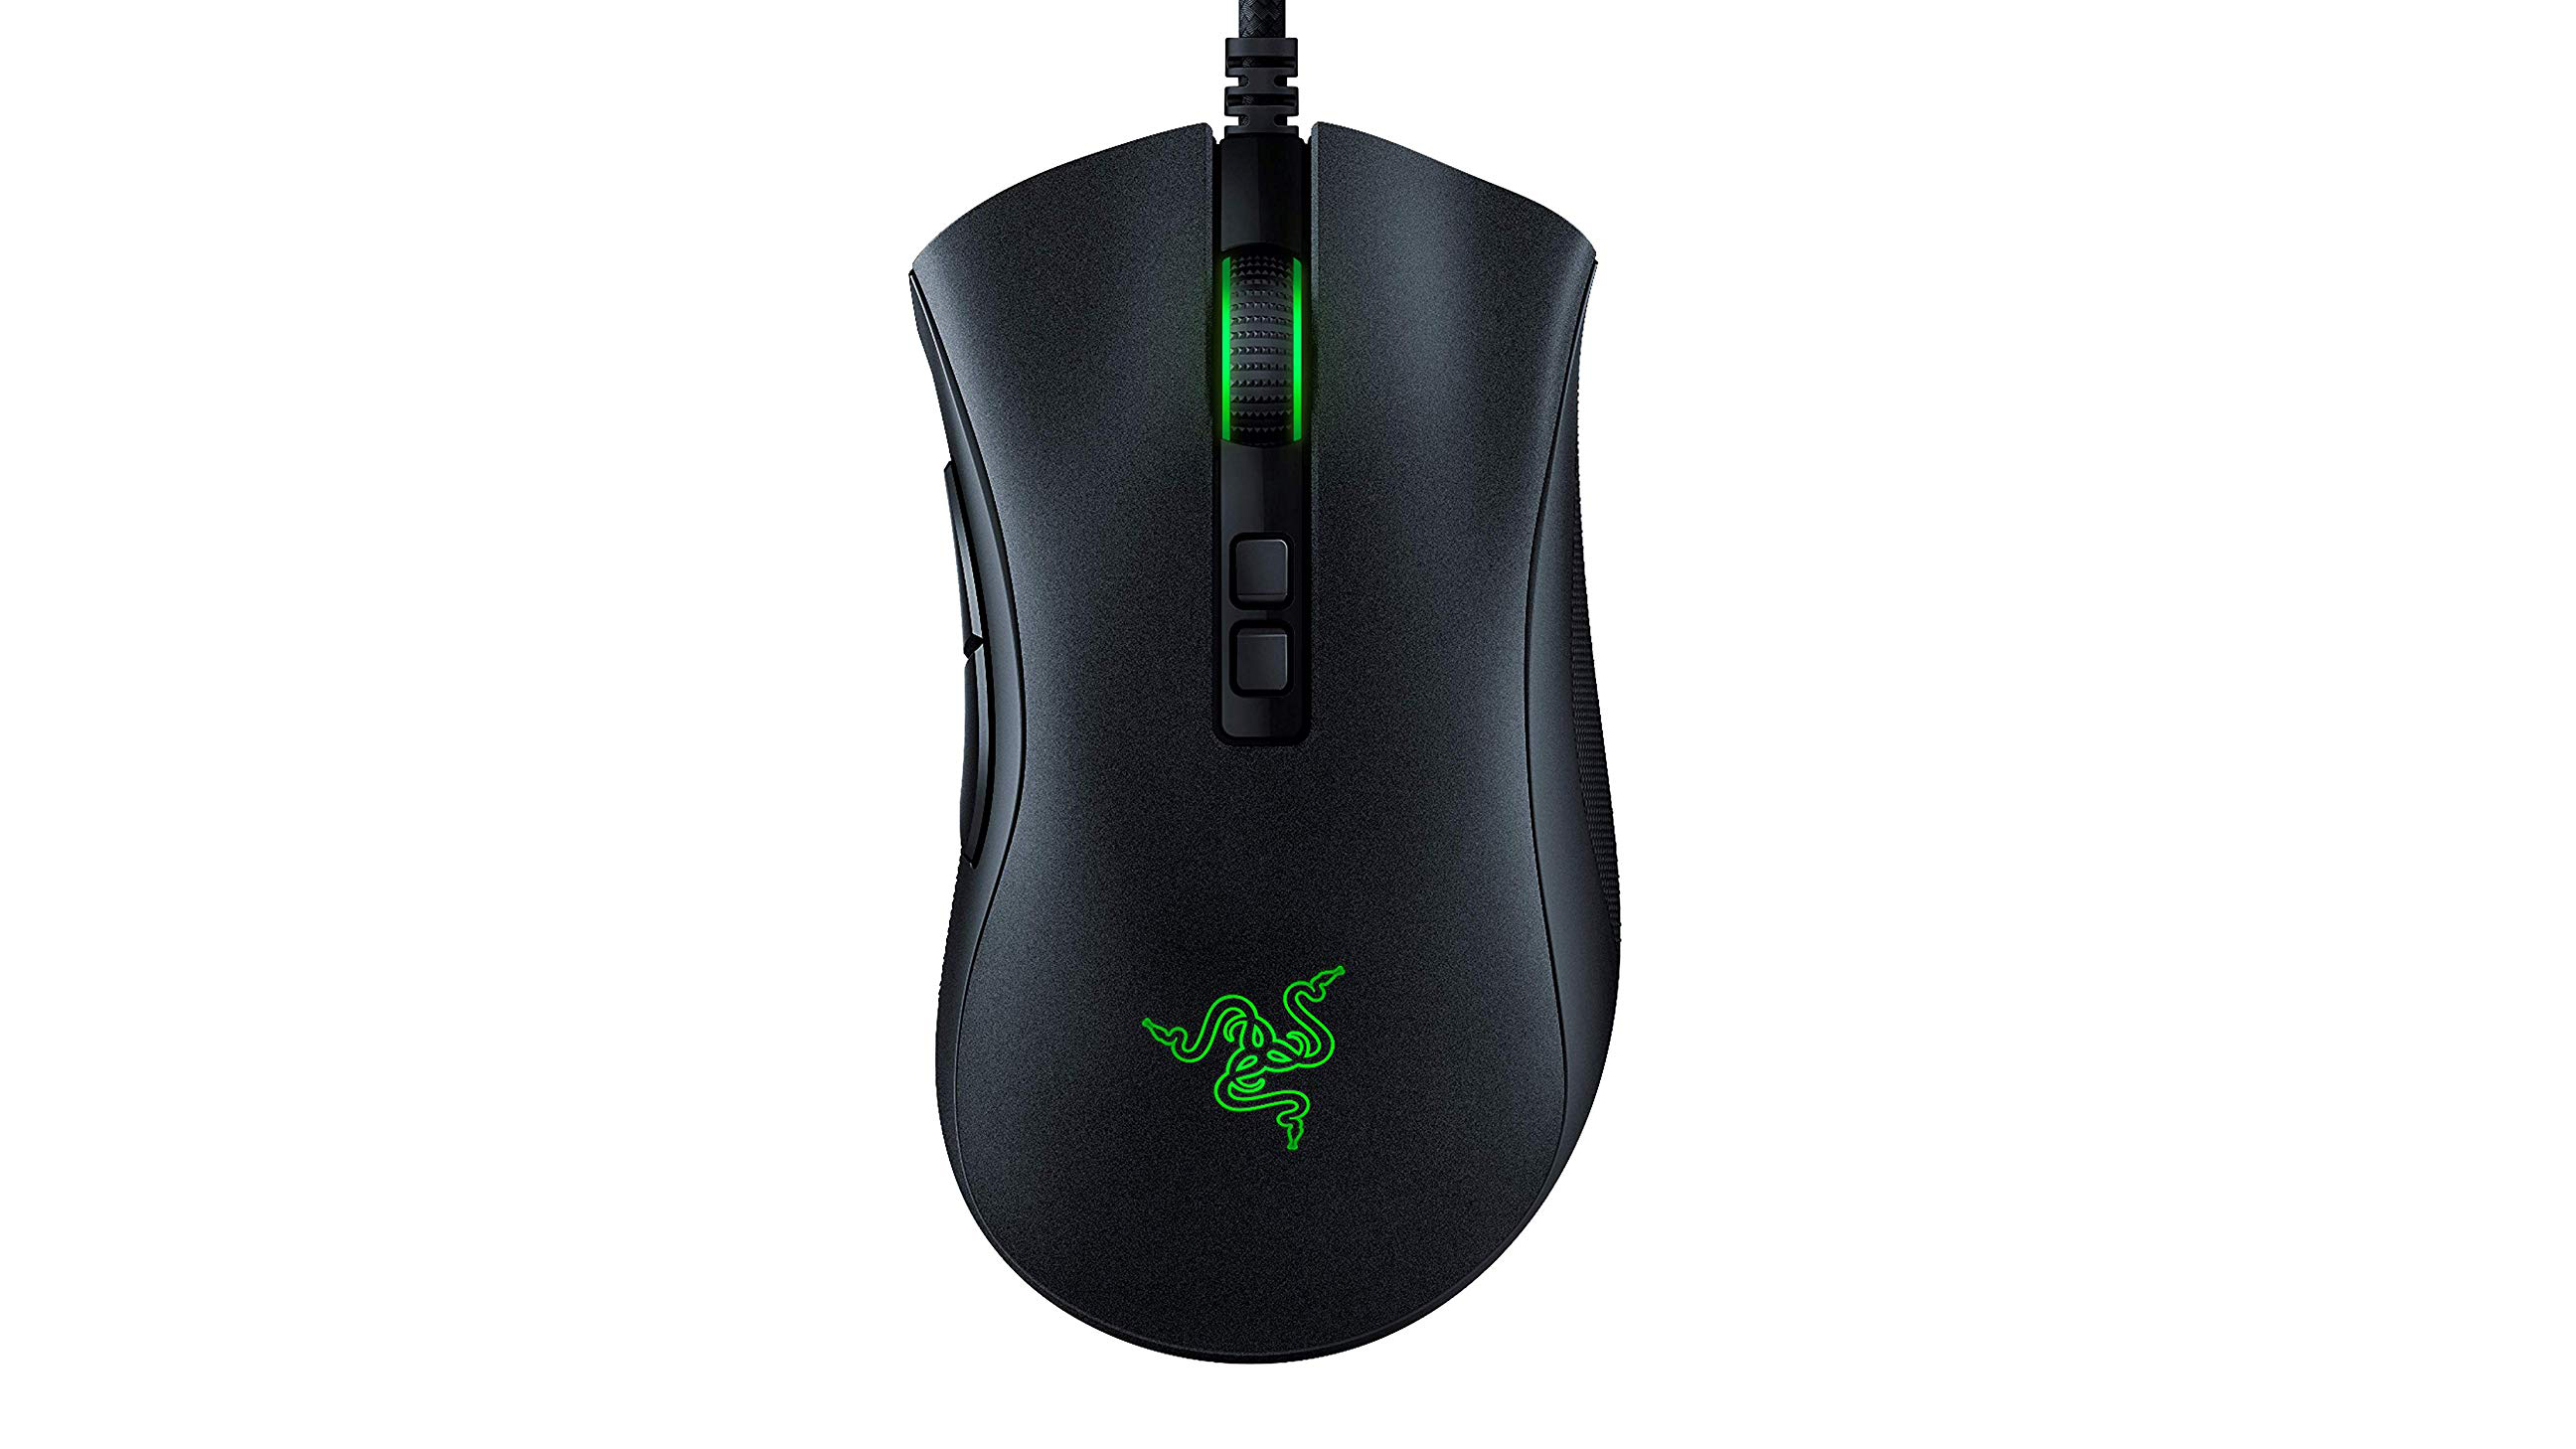 Razer Deathadder V2 is a simple gaming mouse with a simple design.